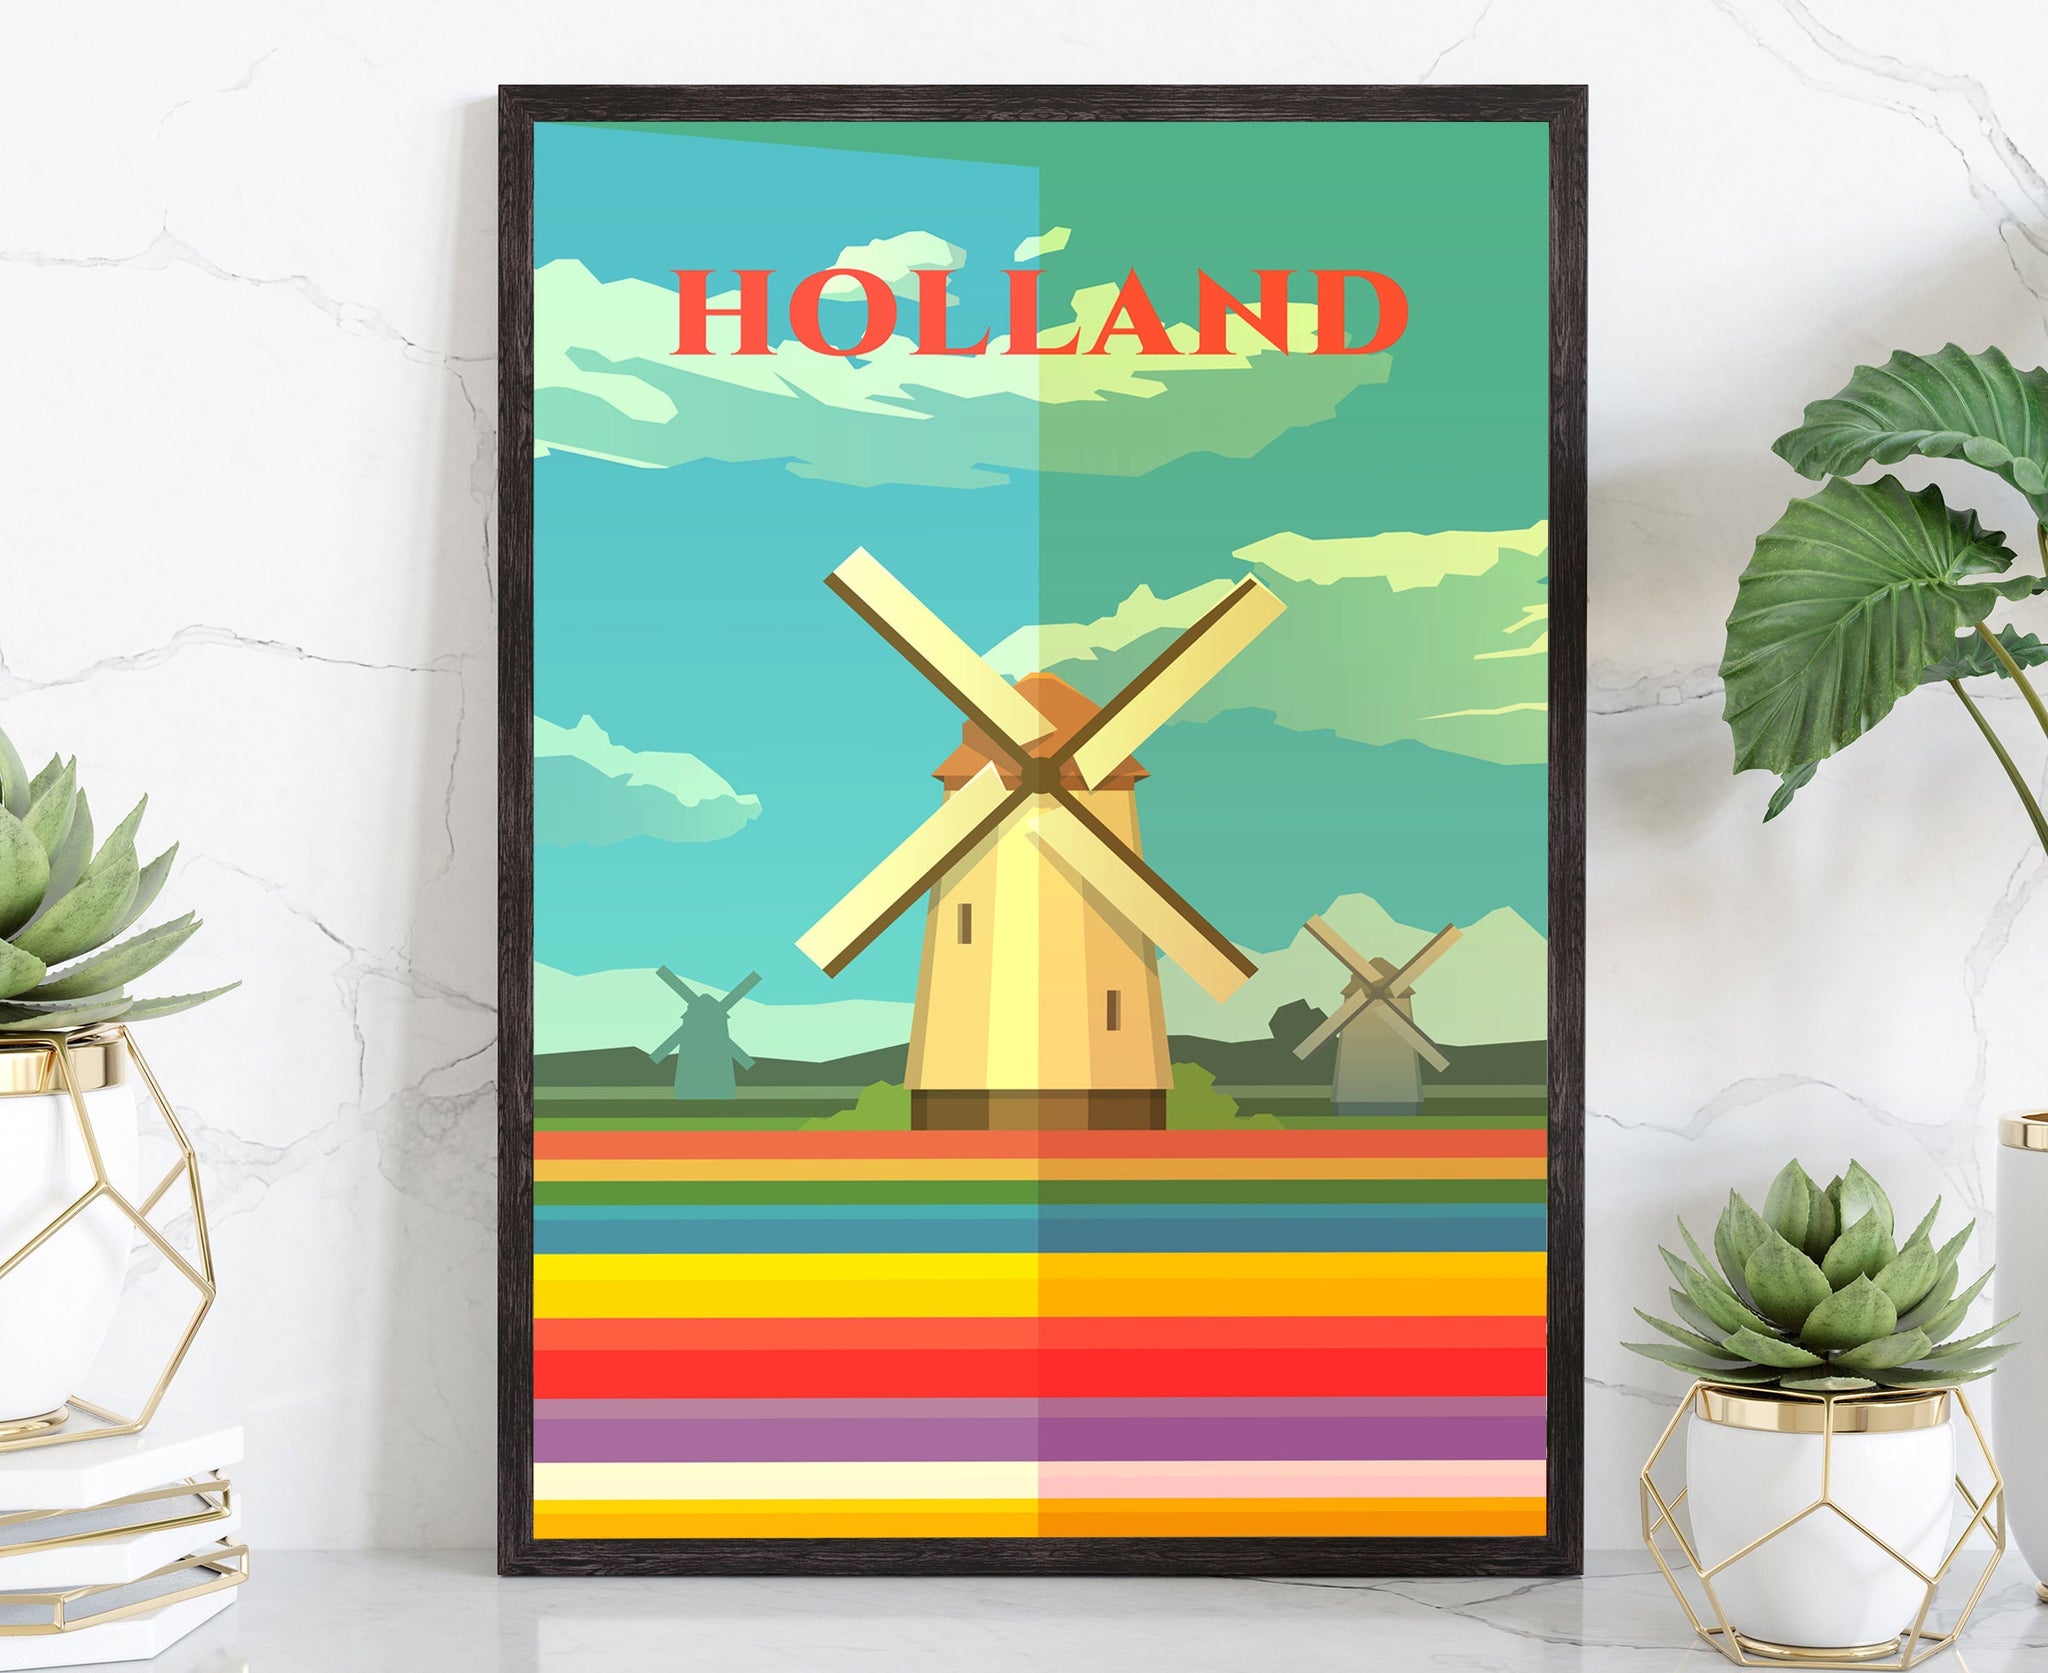 Retro Style Travel Poster, Holland Vintage Rustic Poster Print, Home Wall Art, Office Wall Decoration, Holland Country Map Poster